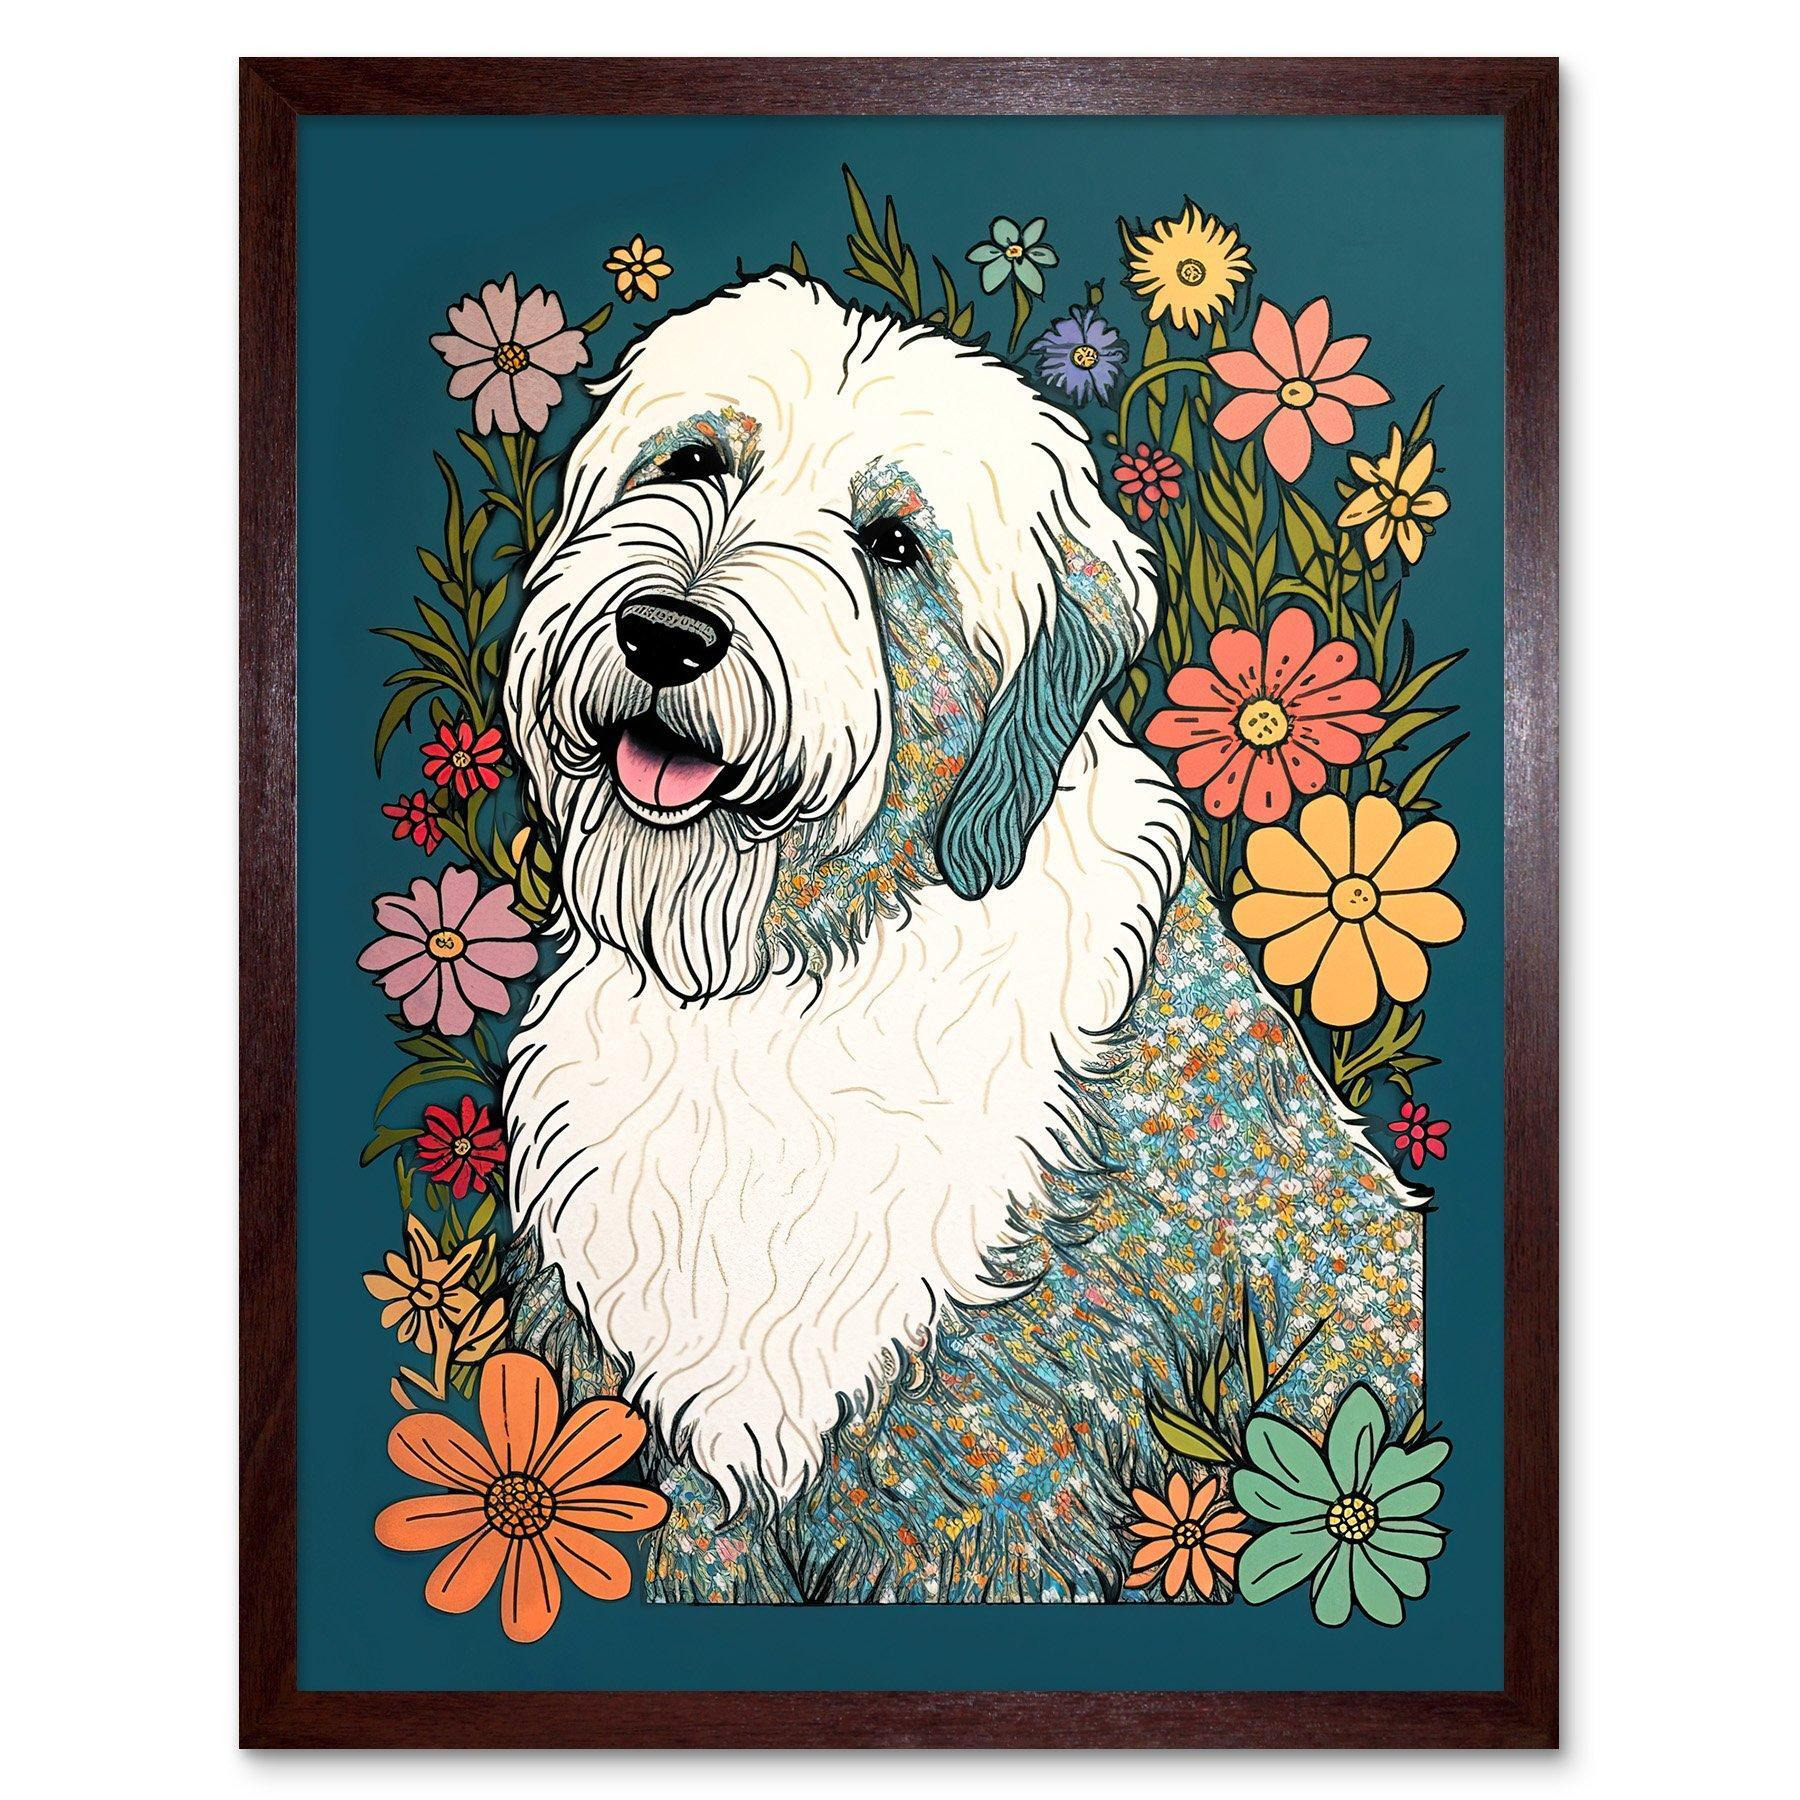 English Sheepdog with Multicolour Daisies Bright Flowers Modern Illustration Art Print Framed Poster Wall Decor 12x16 inch - image 1